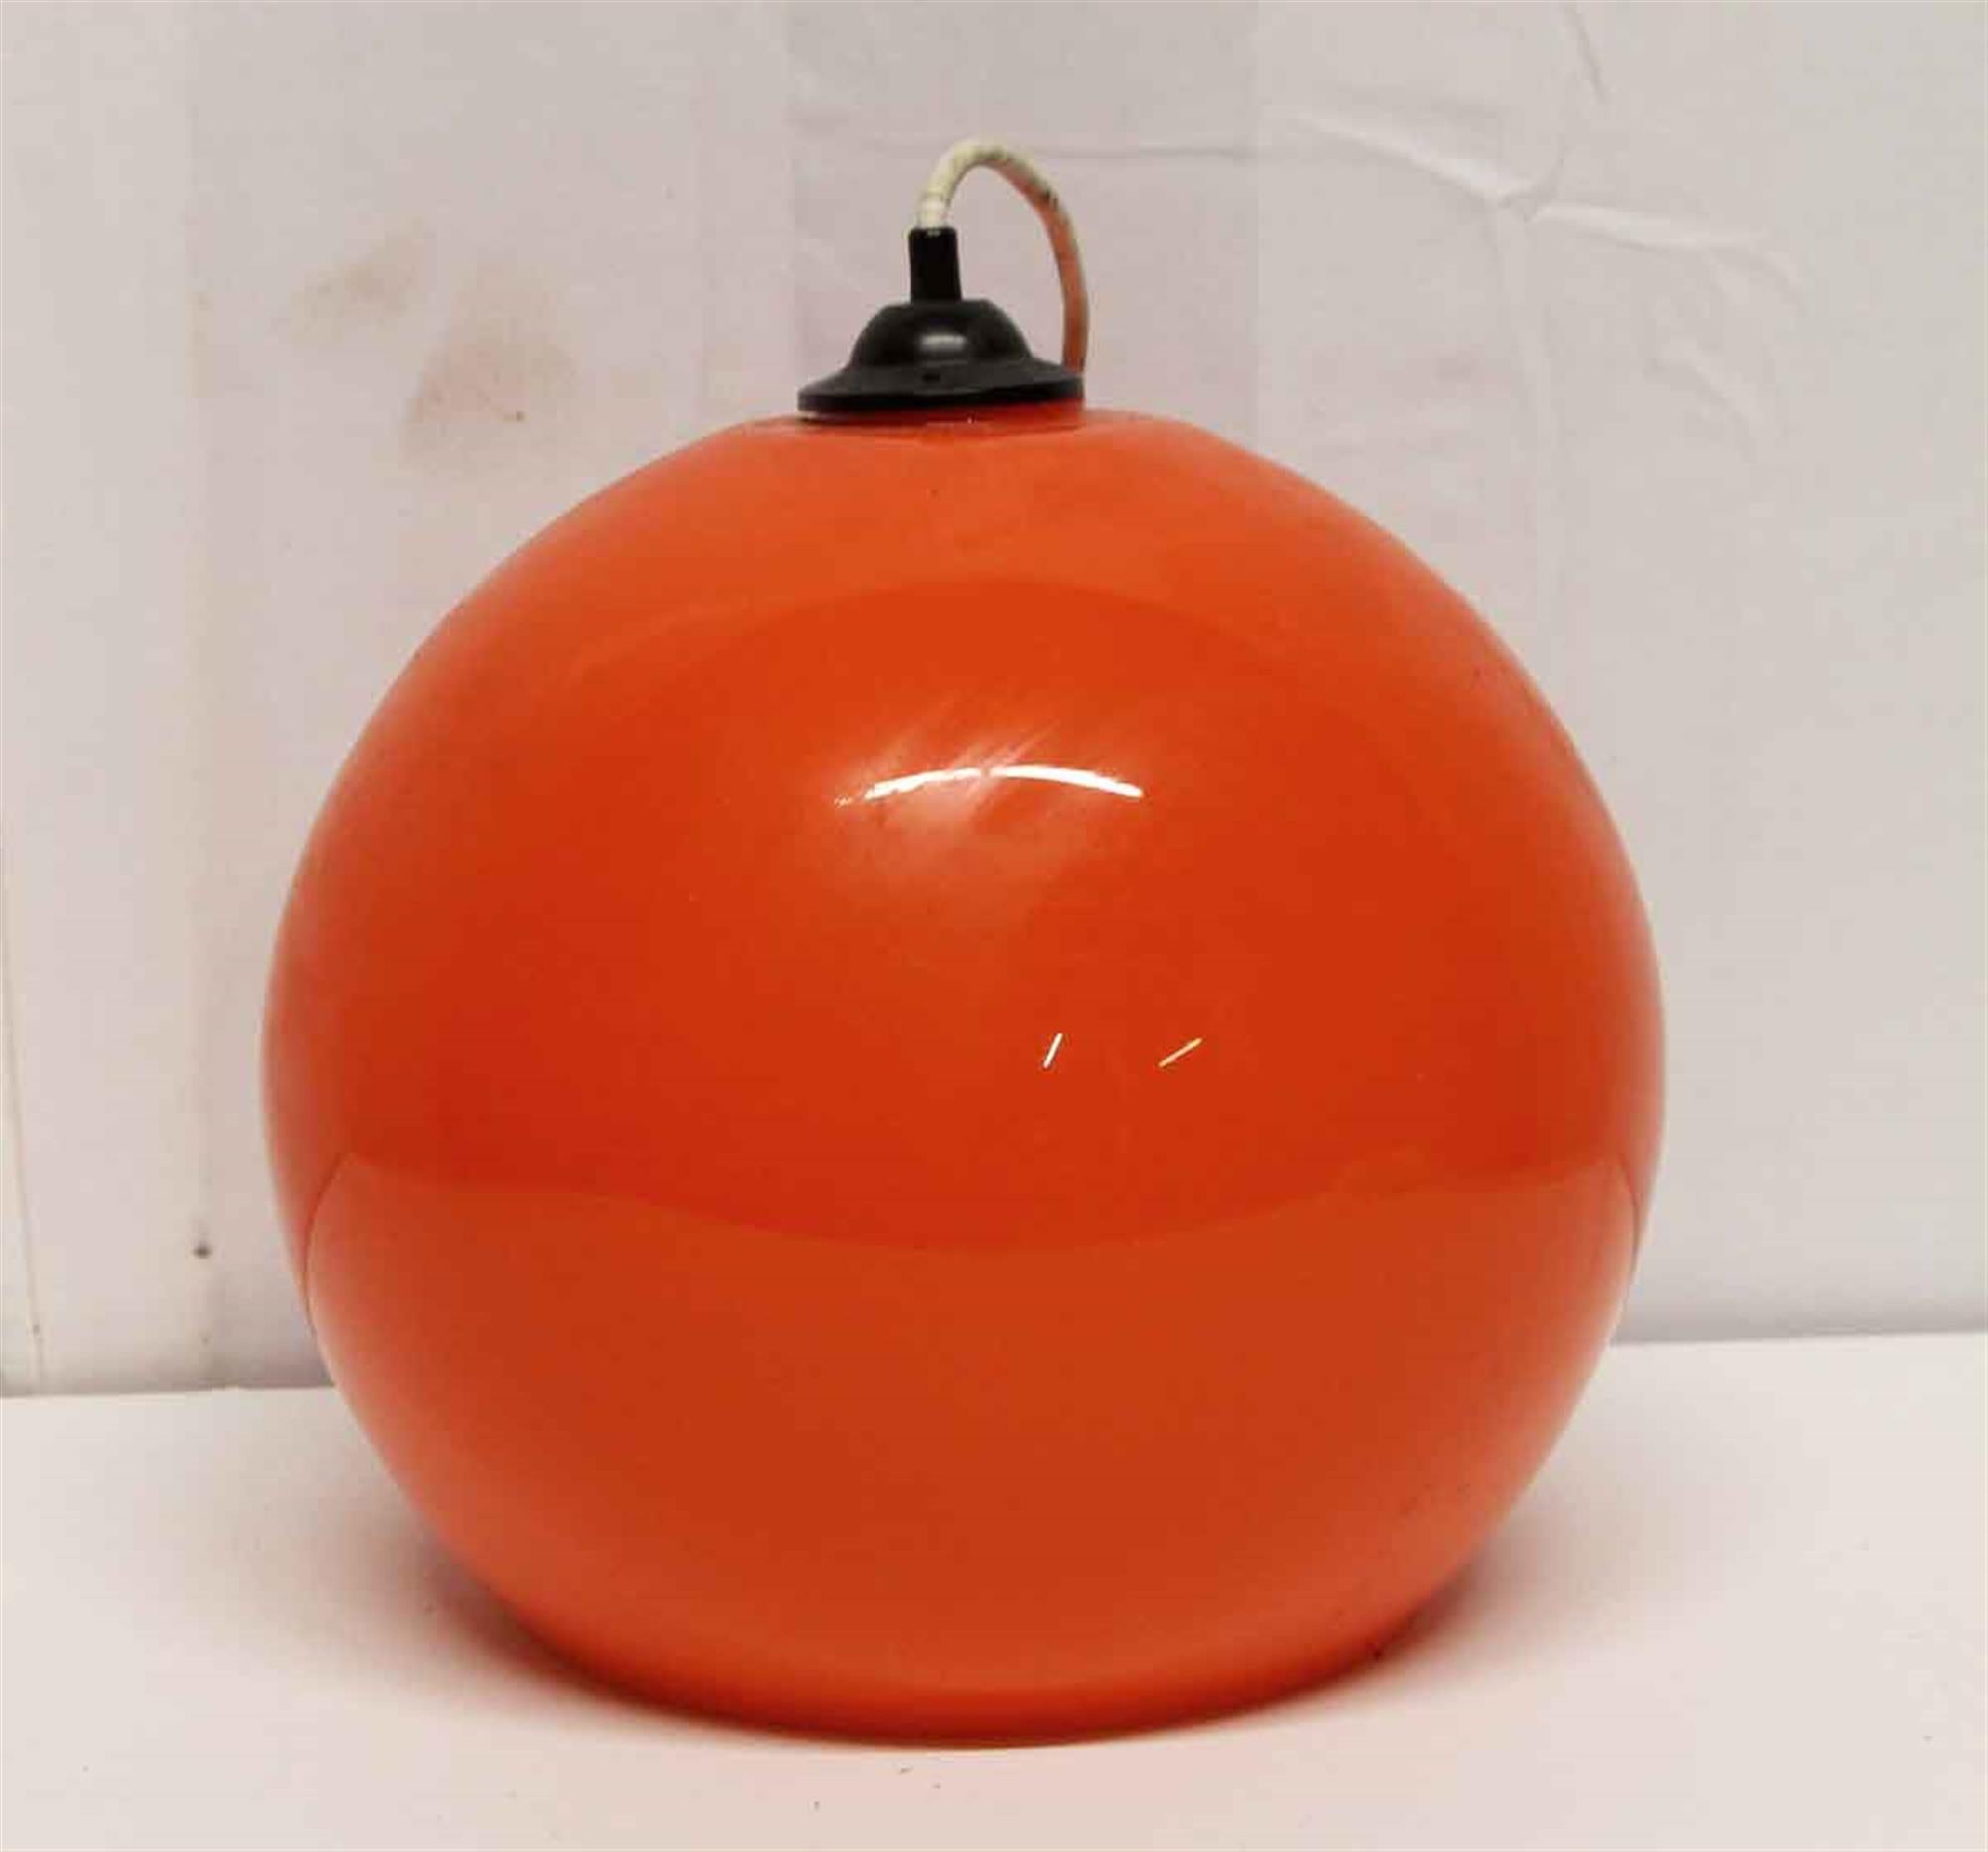 Mid-Century Modern opaline glass orange pendant light fixture from 1970s, France. This can be viewed at one of our New York City locations. Please inquire for the exact address.